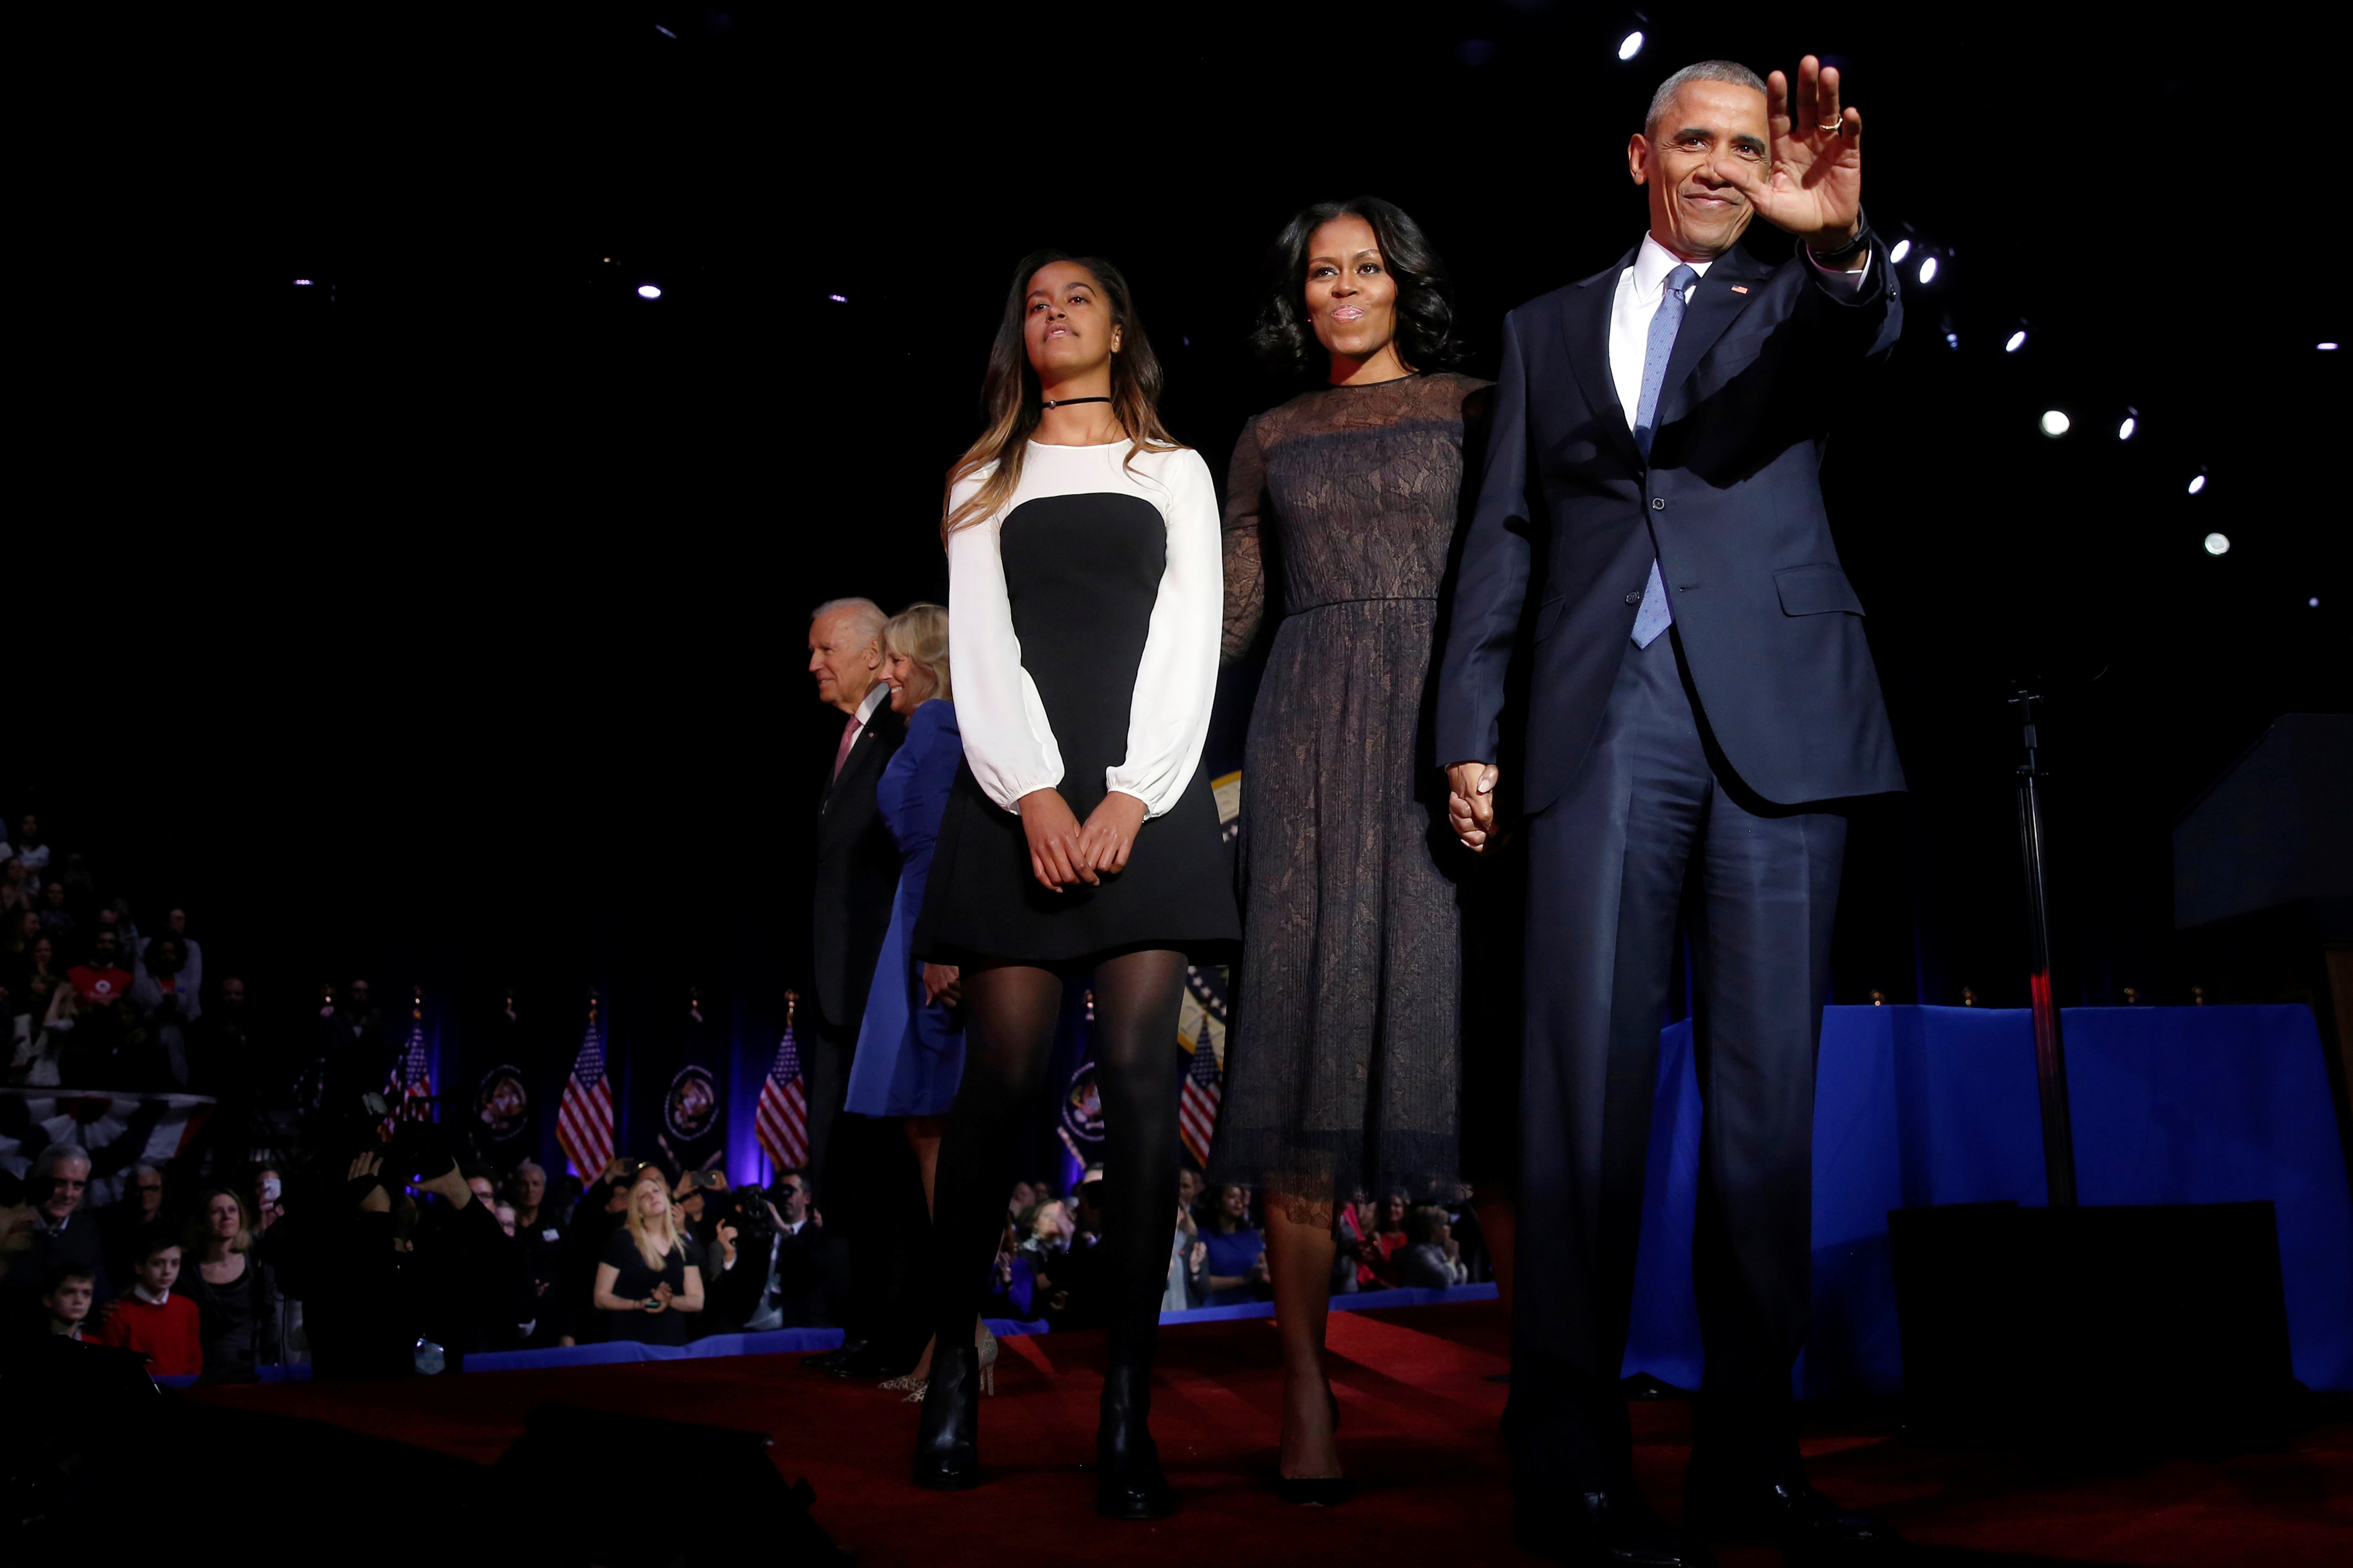 President Barack Obama is joined onstage by first lady Michelle Obama and daughter Malia, Vice President Joe Biden and his wife Jill Biden, after his farewell address in Chicago, Illinois. REUTERS/Jonathan Ernst